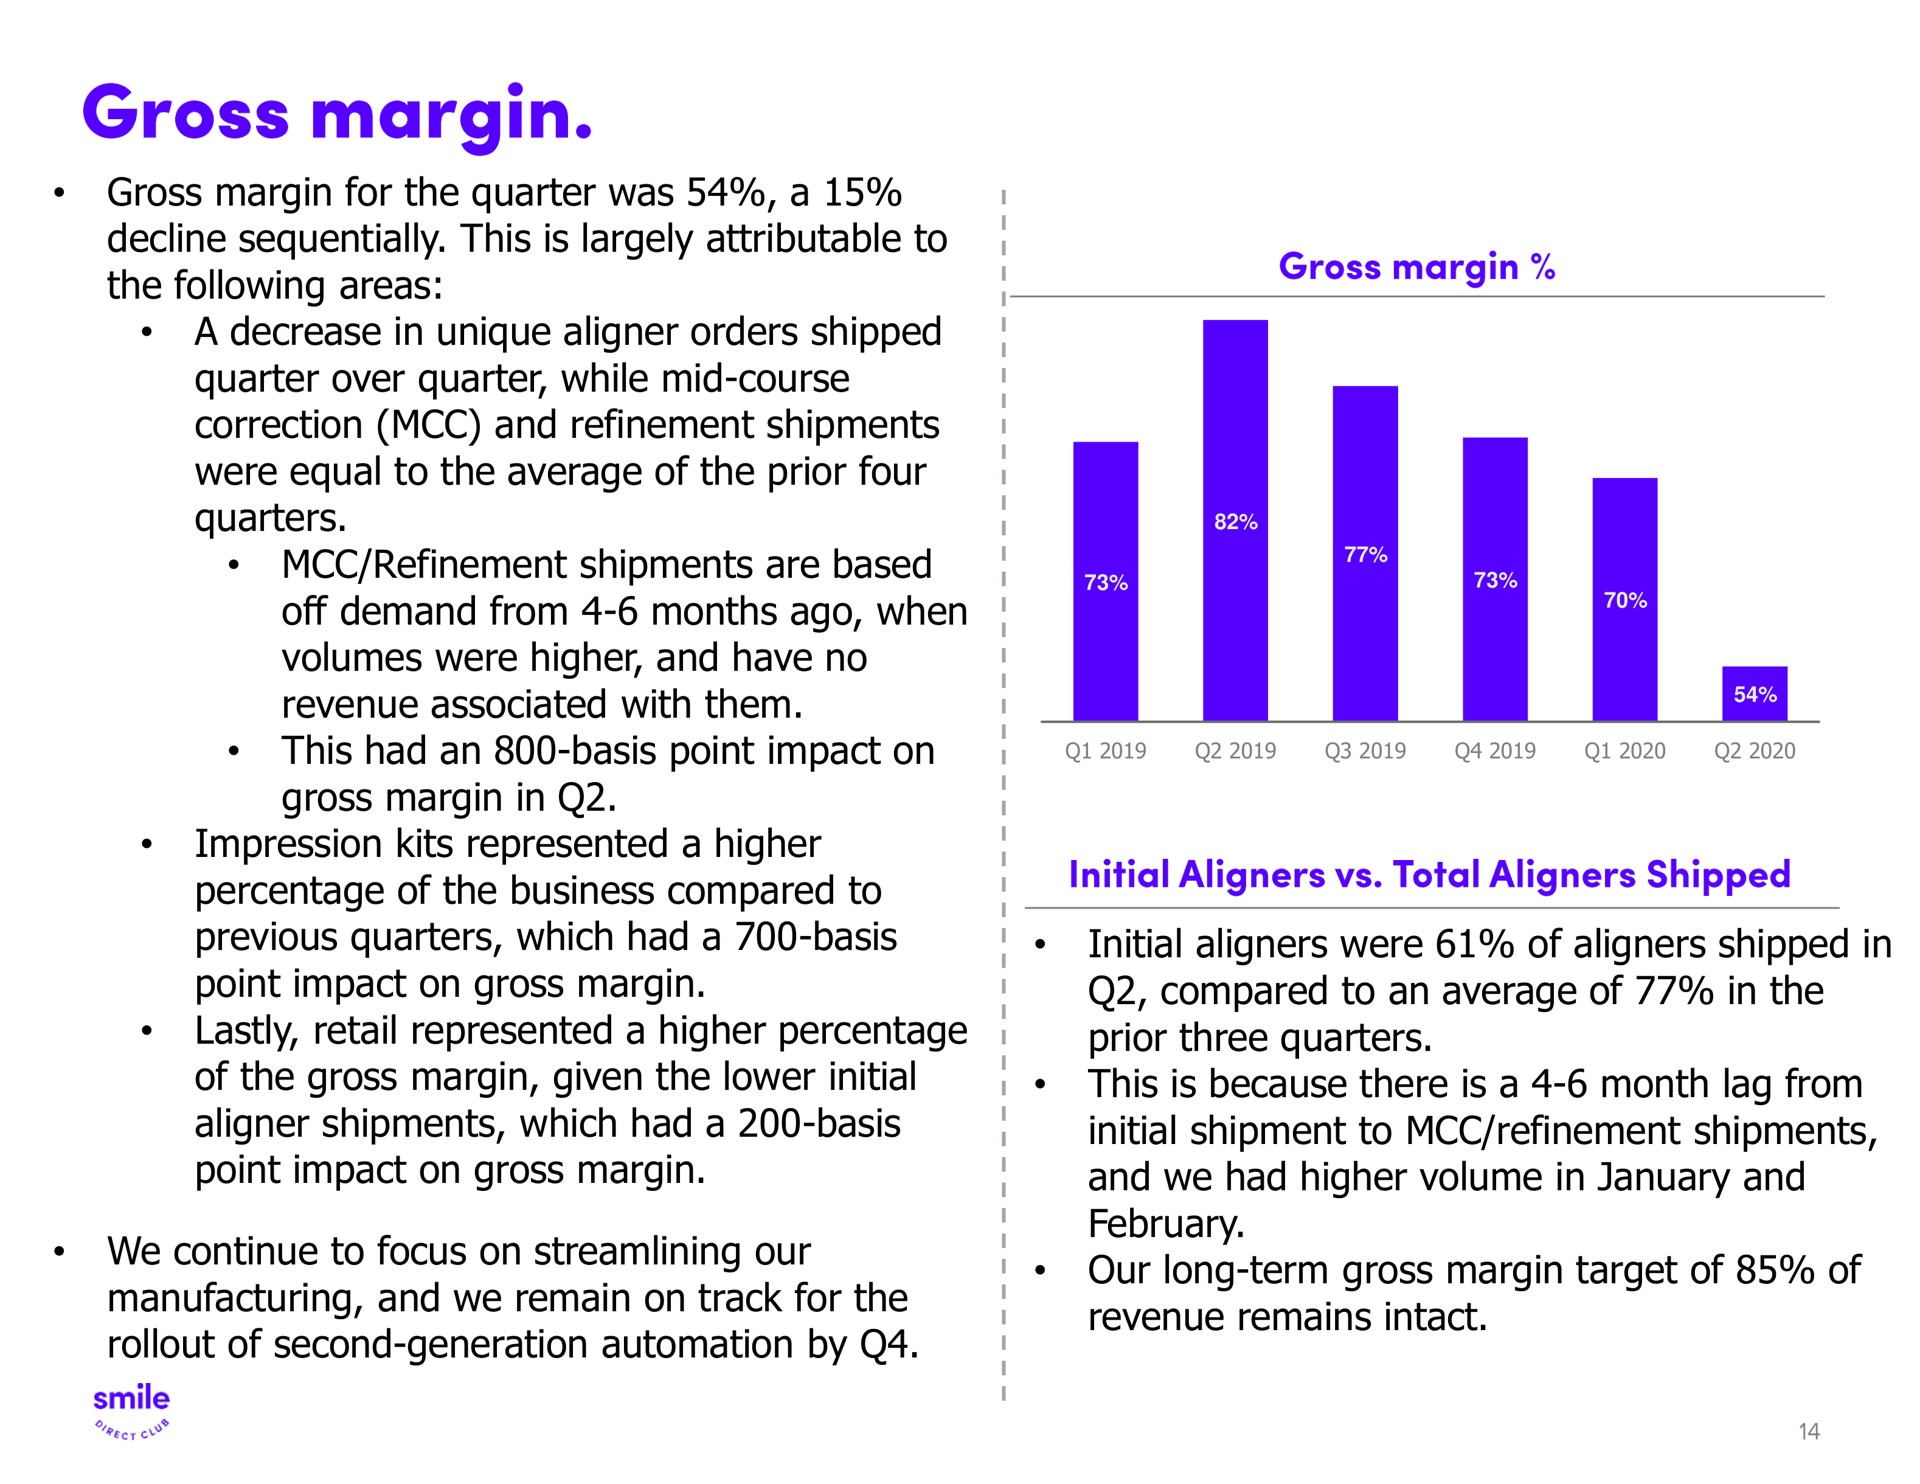 gross margin for the quarter was a decline sequentially this is largely attributable to the following areas a decrease in unique aligner orders shipped quarter over quarter while mid course correction and refinement shipments were equal to the average of the prior four quarters refinement shipments are based off demand from months ago when volumes were higher and have no revenue associated with them this had an basis point impact on gross margin in impression kits represented a higher percentage of the business compared to previous quarters which had a basis point impact on gross margin lastly retail represented a higher percentage of the gross margin given the lower initial aligner shipments which had a basis point impact on gross margin we continue to focus on streamlining our manufacturing and we remain on track for the of second generation by initial were of shipped in compared to an average of in the prior three quarters this is because there is a month lag from initial shipment to refinement shipments and we had higher volume in and our long term gross margin target of of revenue remains intact | SmileDirectClub